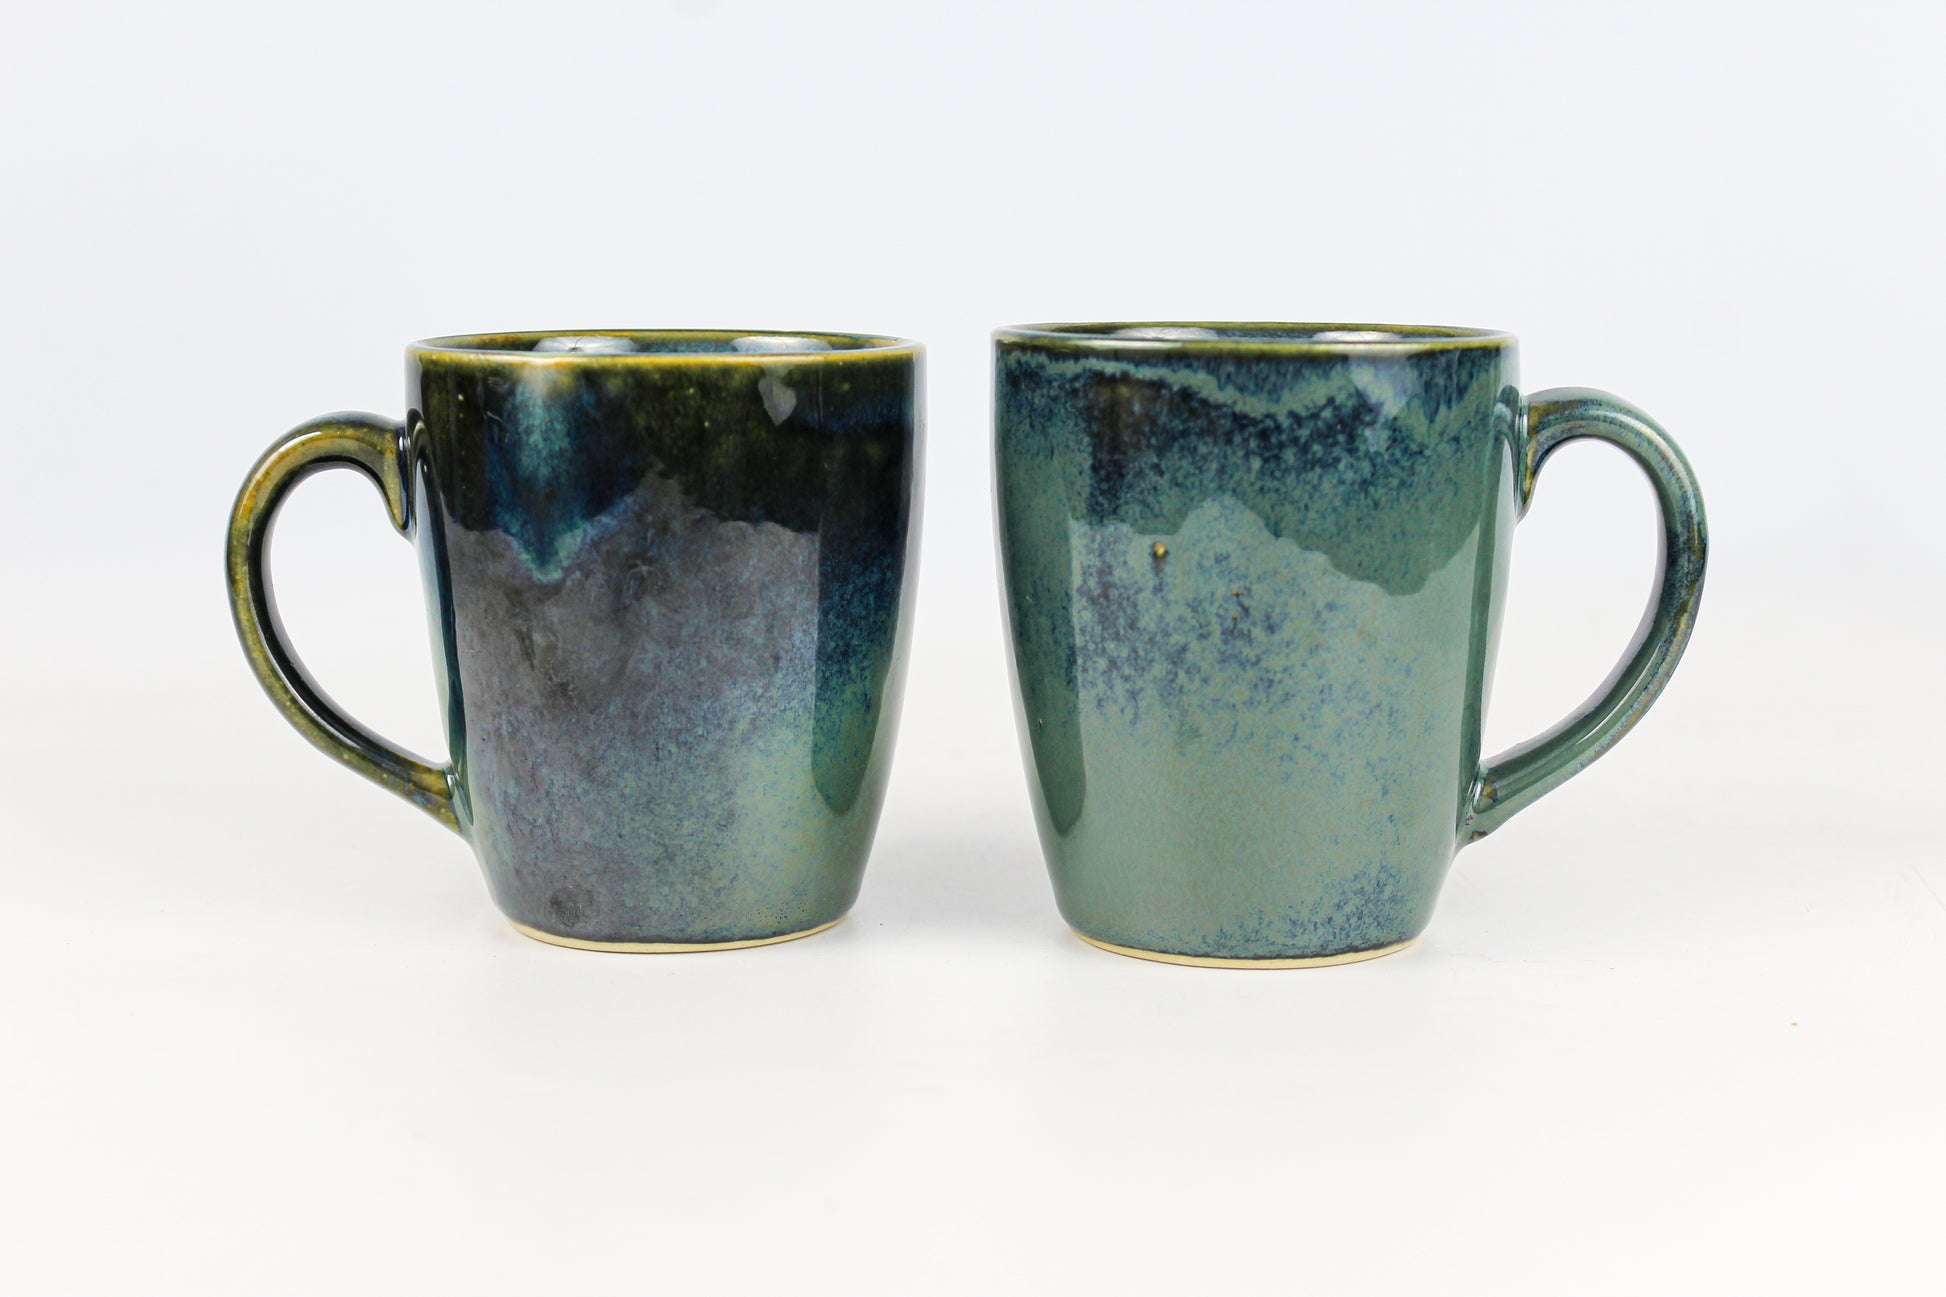 Robusta - Coral Handcrafted Ceramic Coffee Mugs